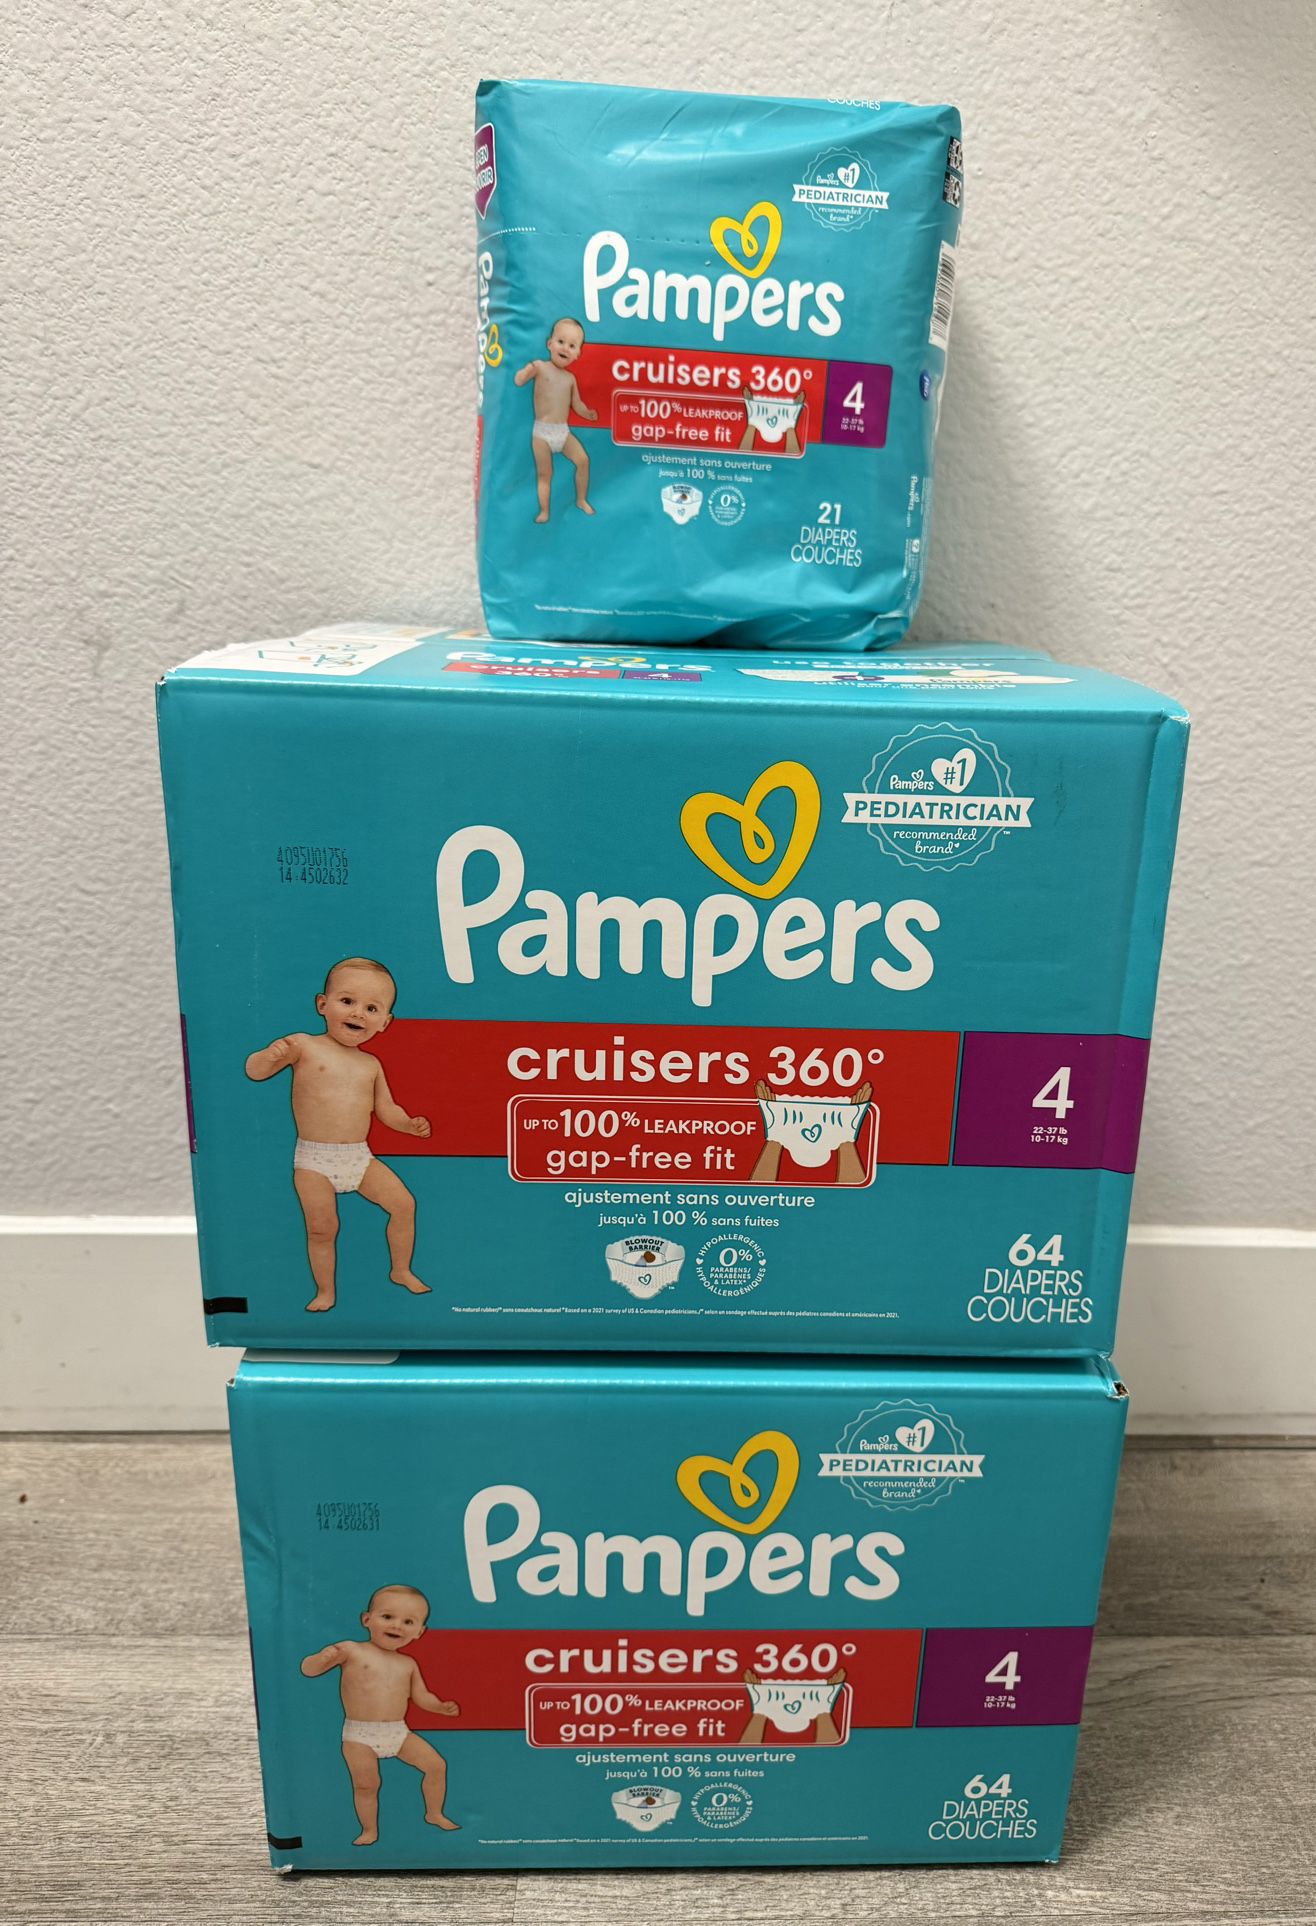 Pampers Cruisers 360 Size 4 (149 Total)